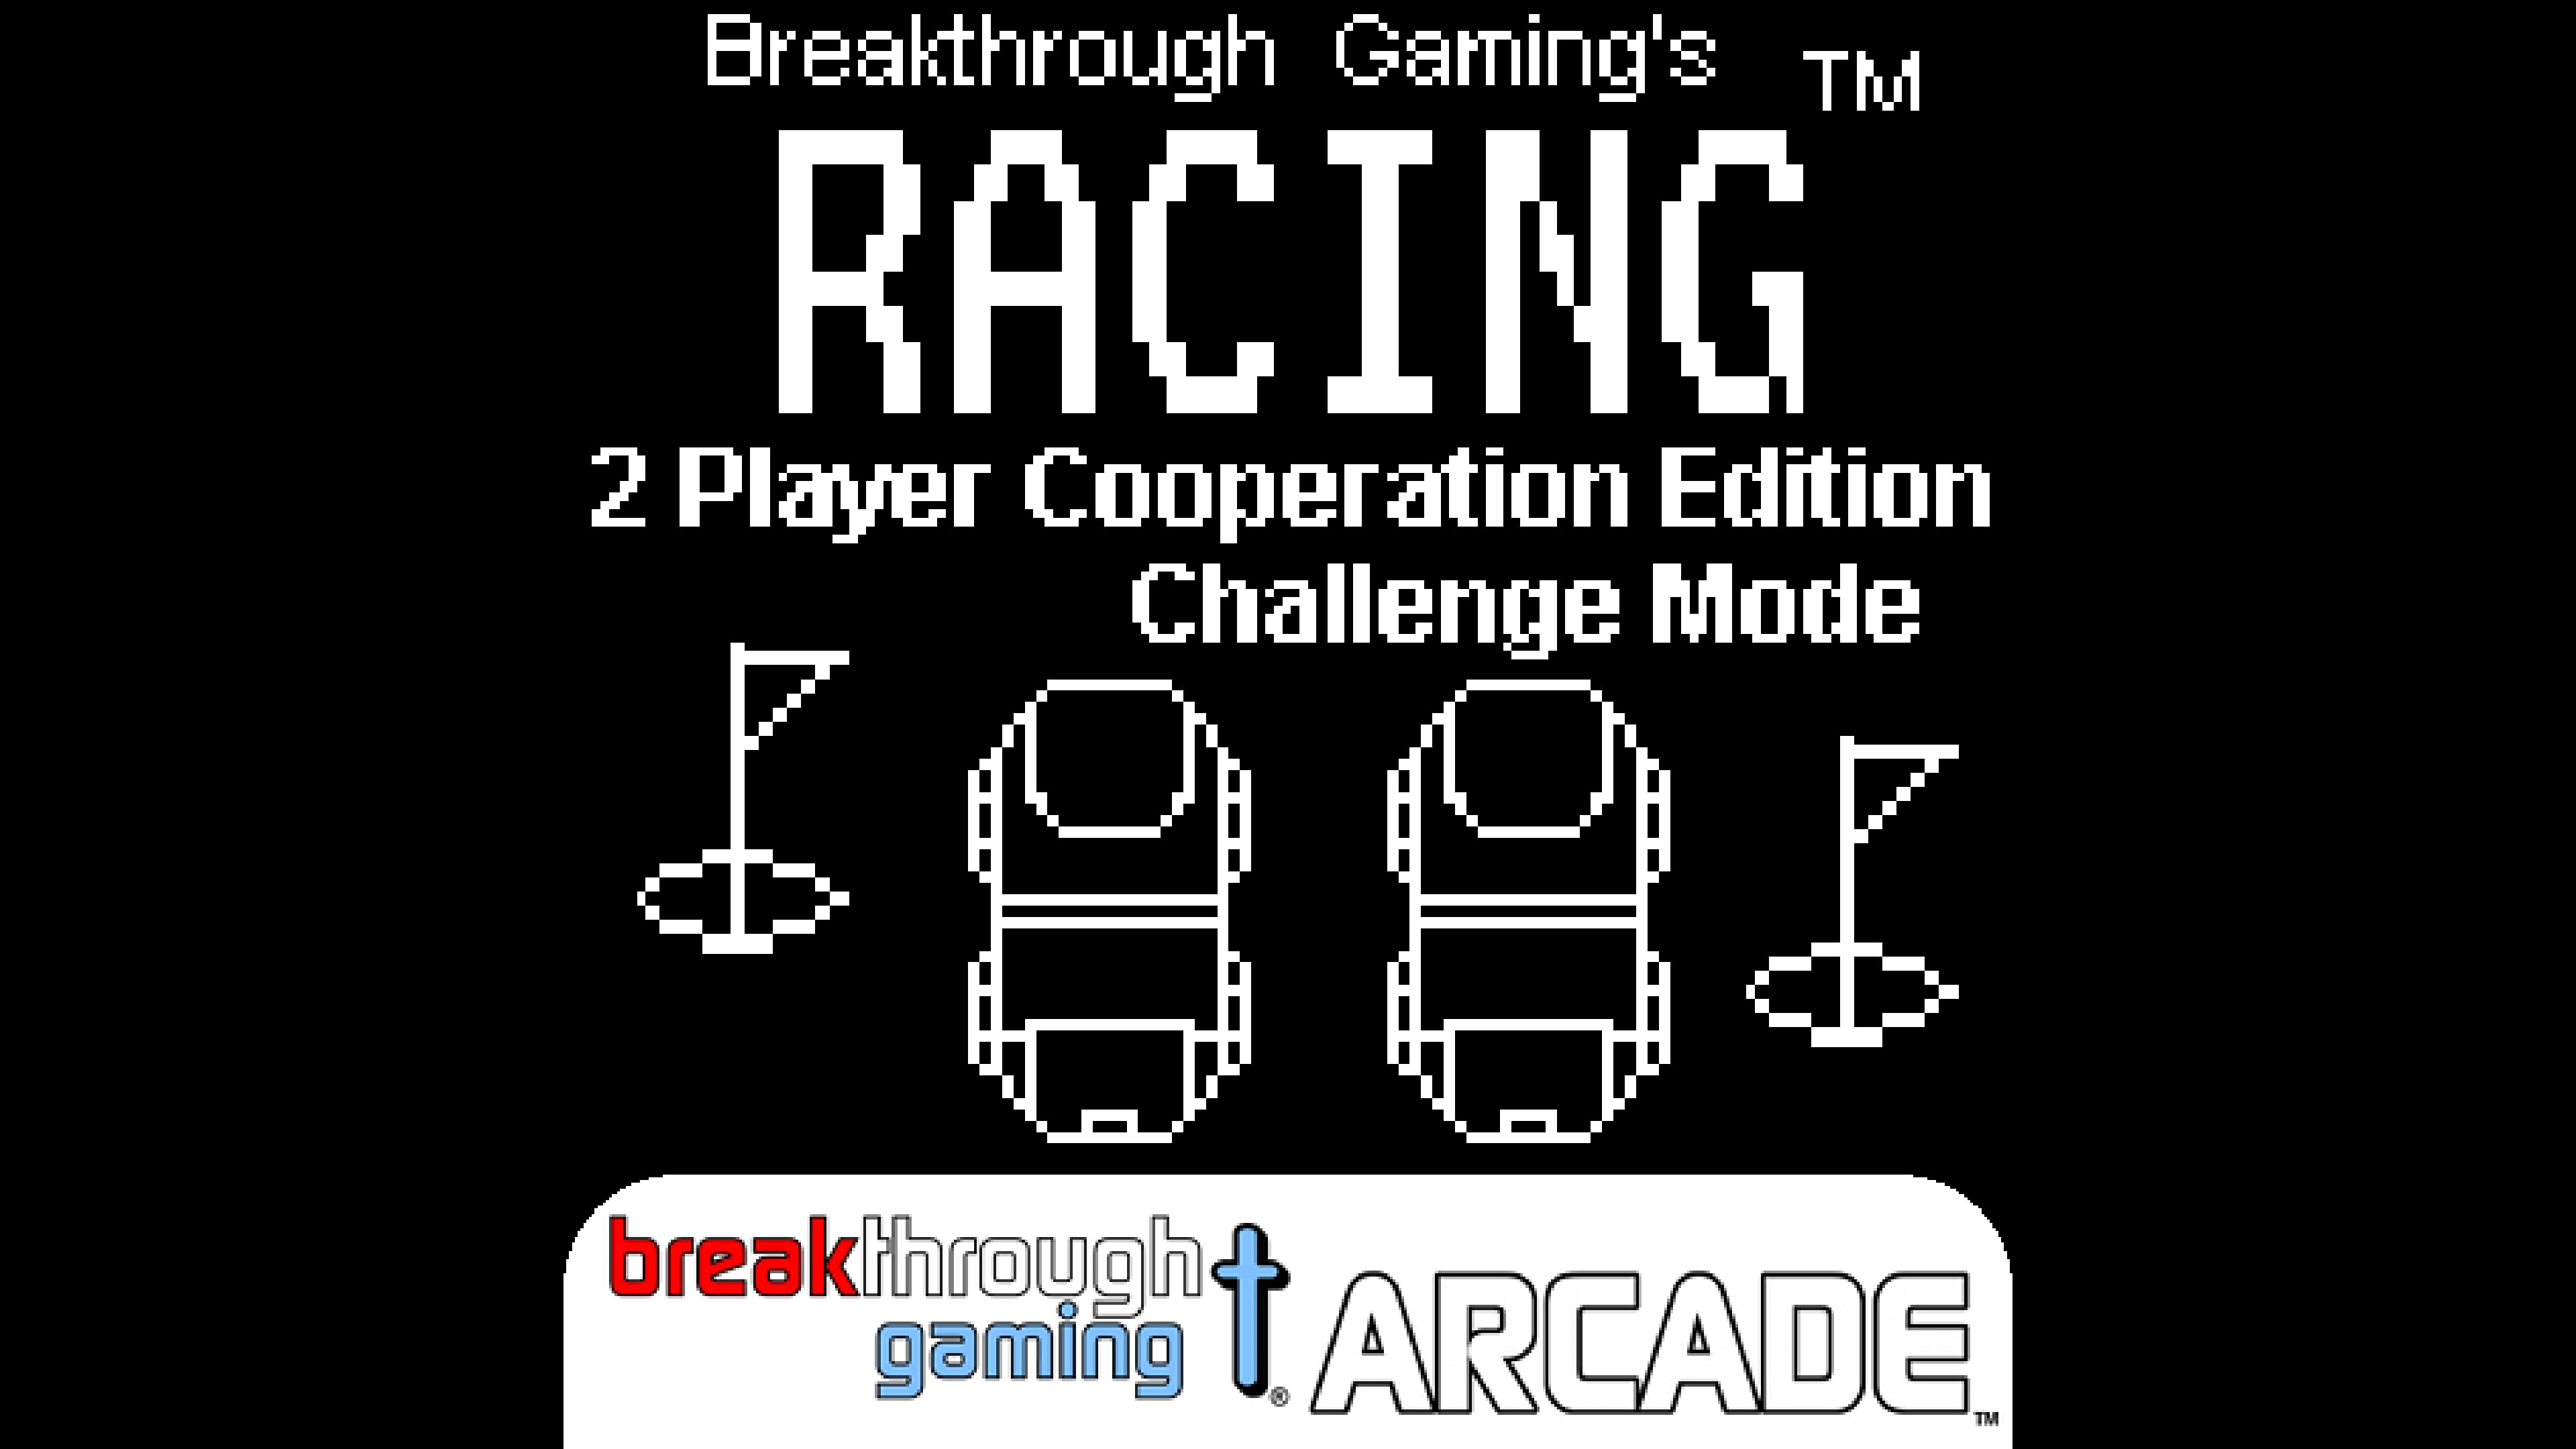 Racing (2 Player Cooperation Edition) (Challenge Mode) - Breakthrough Gaming Arcade